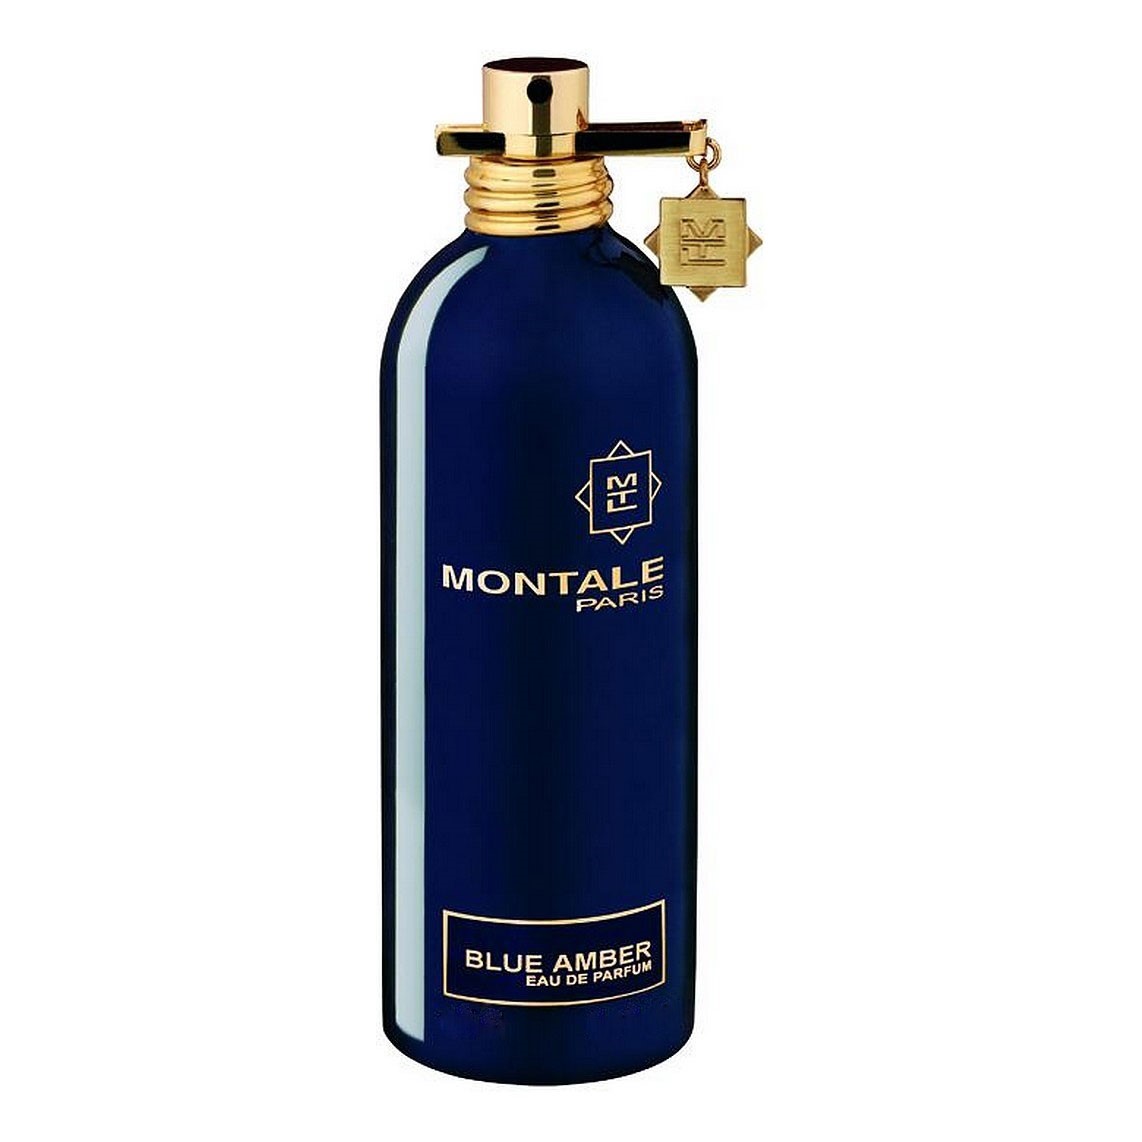 MONTALE BLUE AMBER